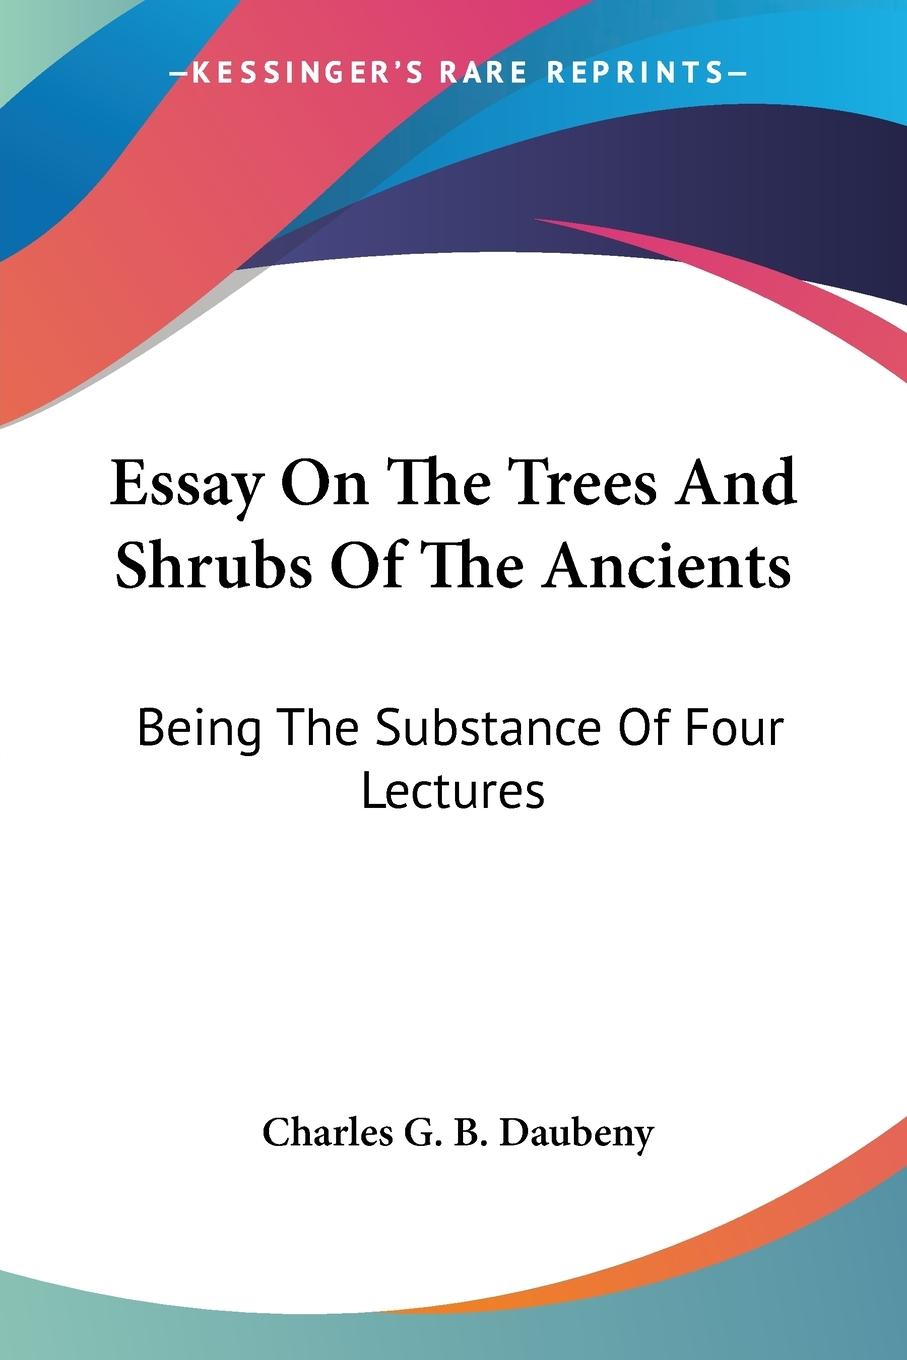 Essay On The Trees And Shrubs Of The Ancients - Daubeny, Charles G. B.